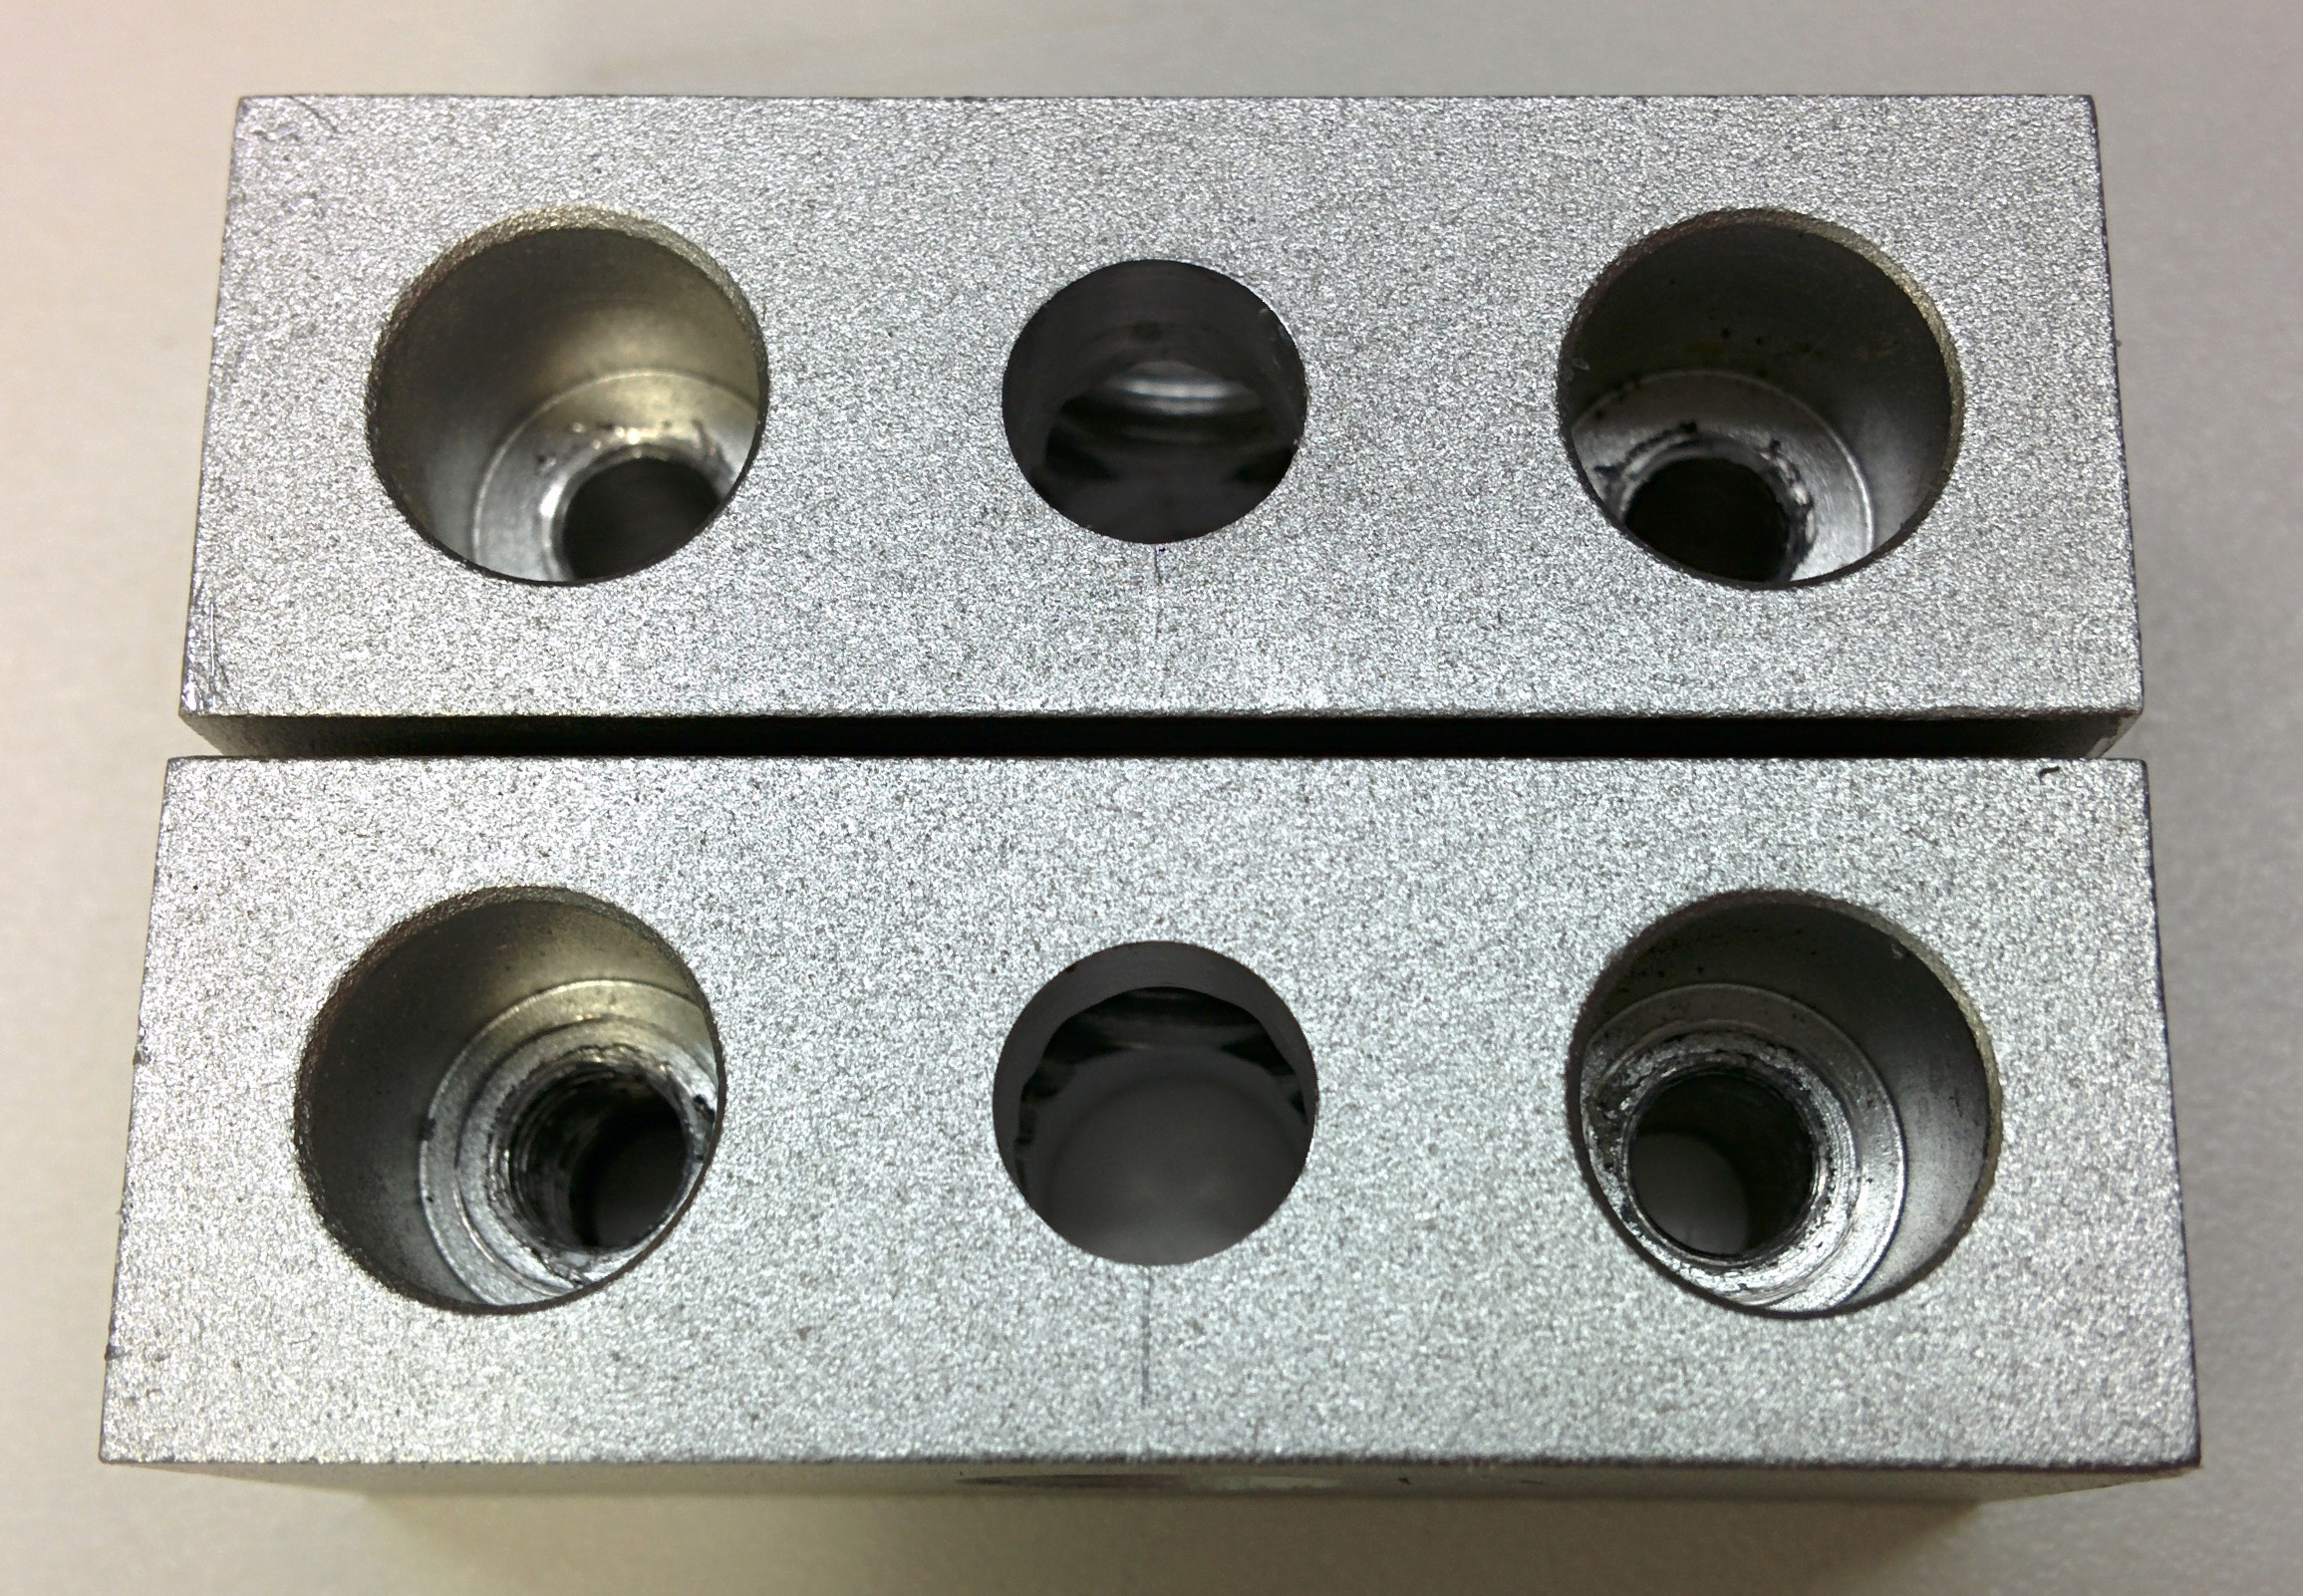 Spacer blocks with 6.35mm holes milled in center per drawing above.